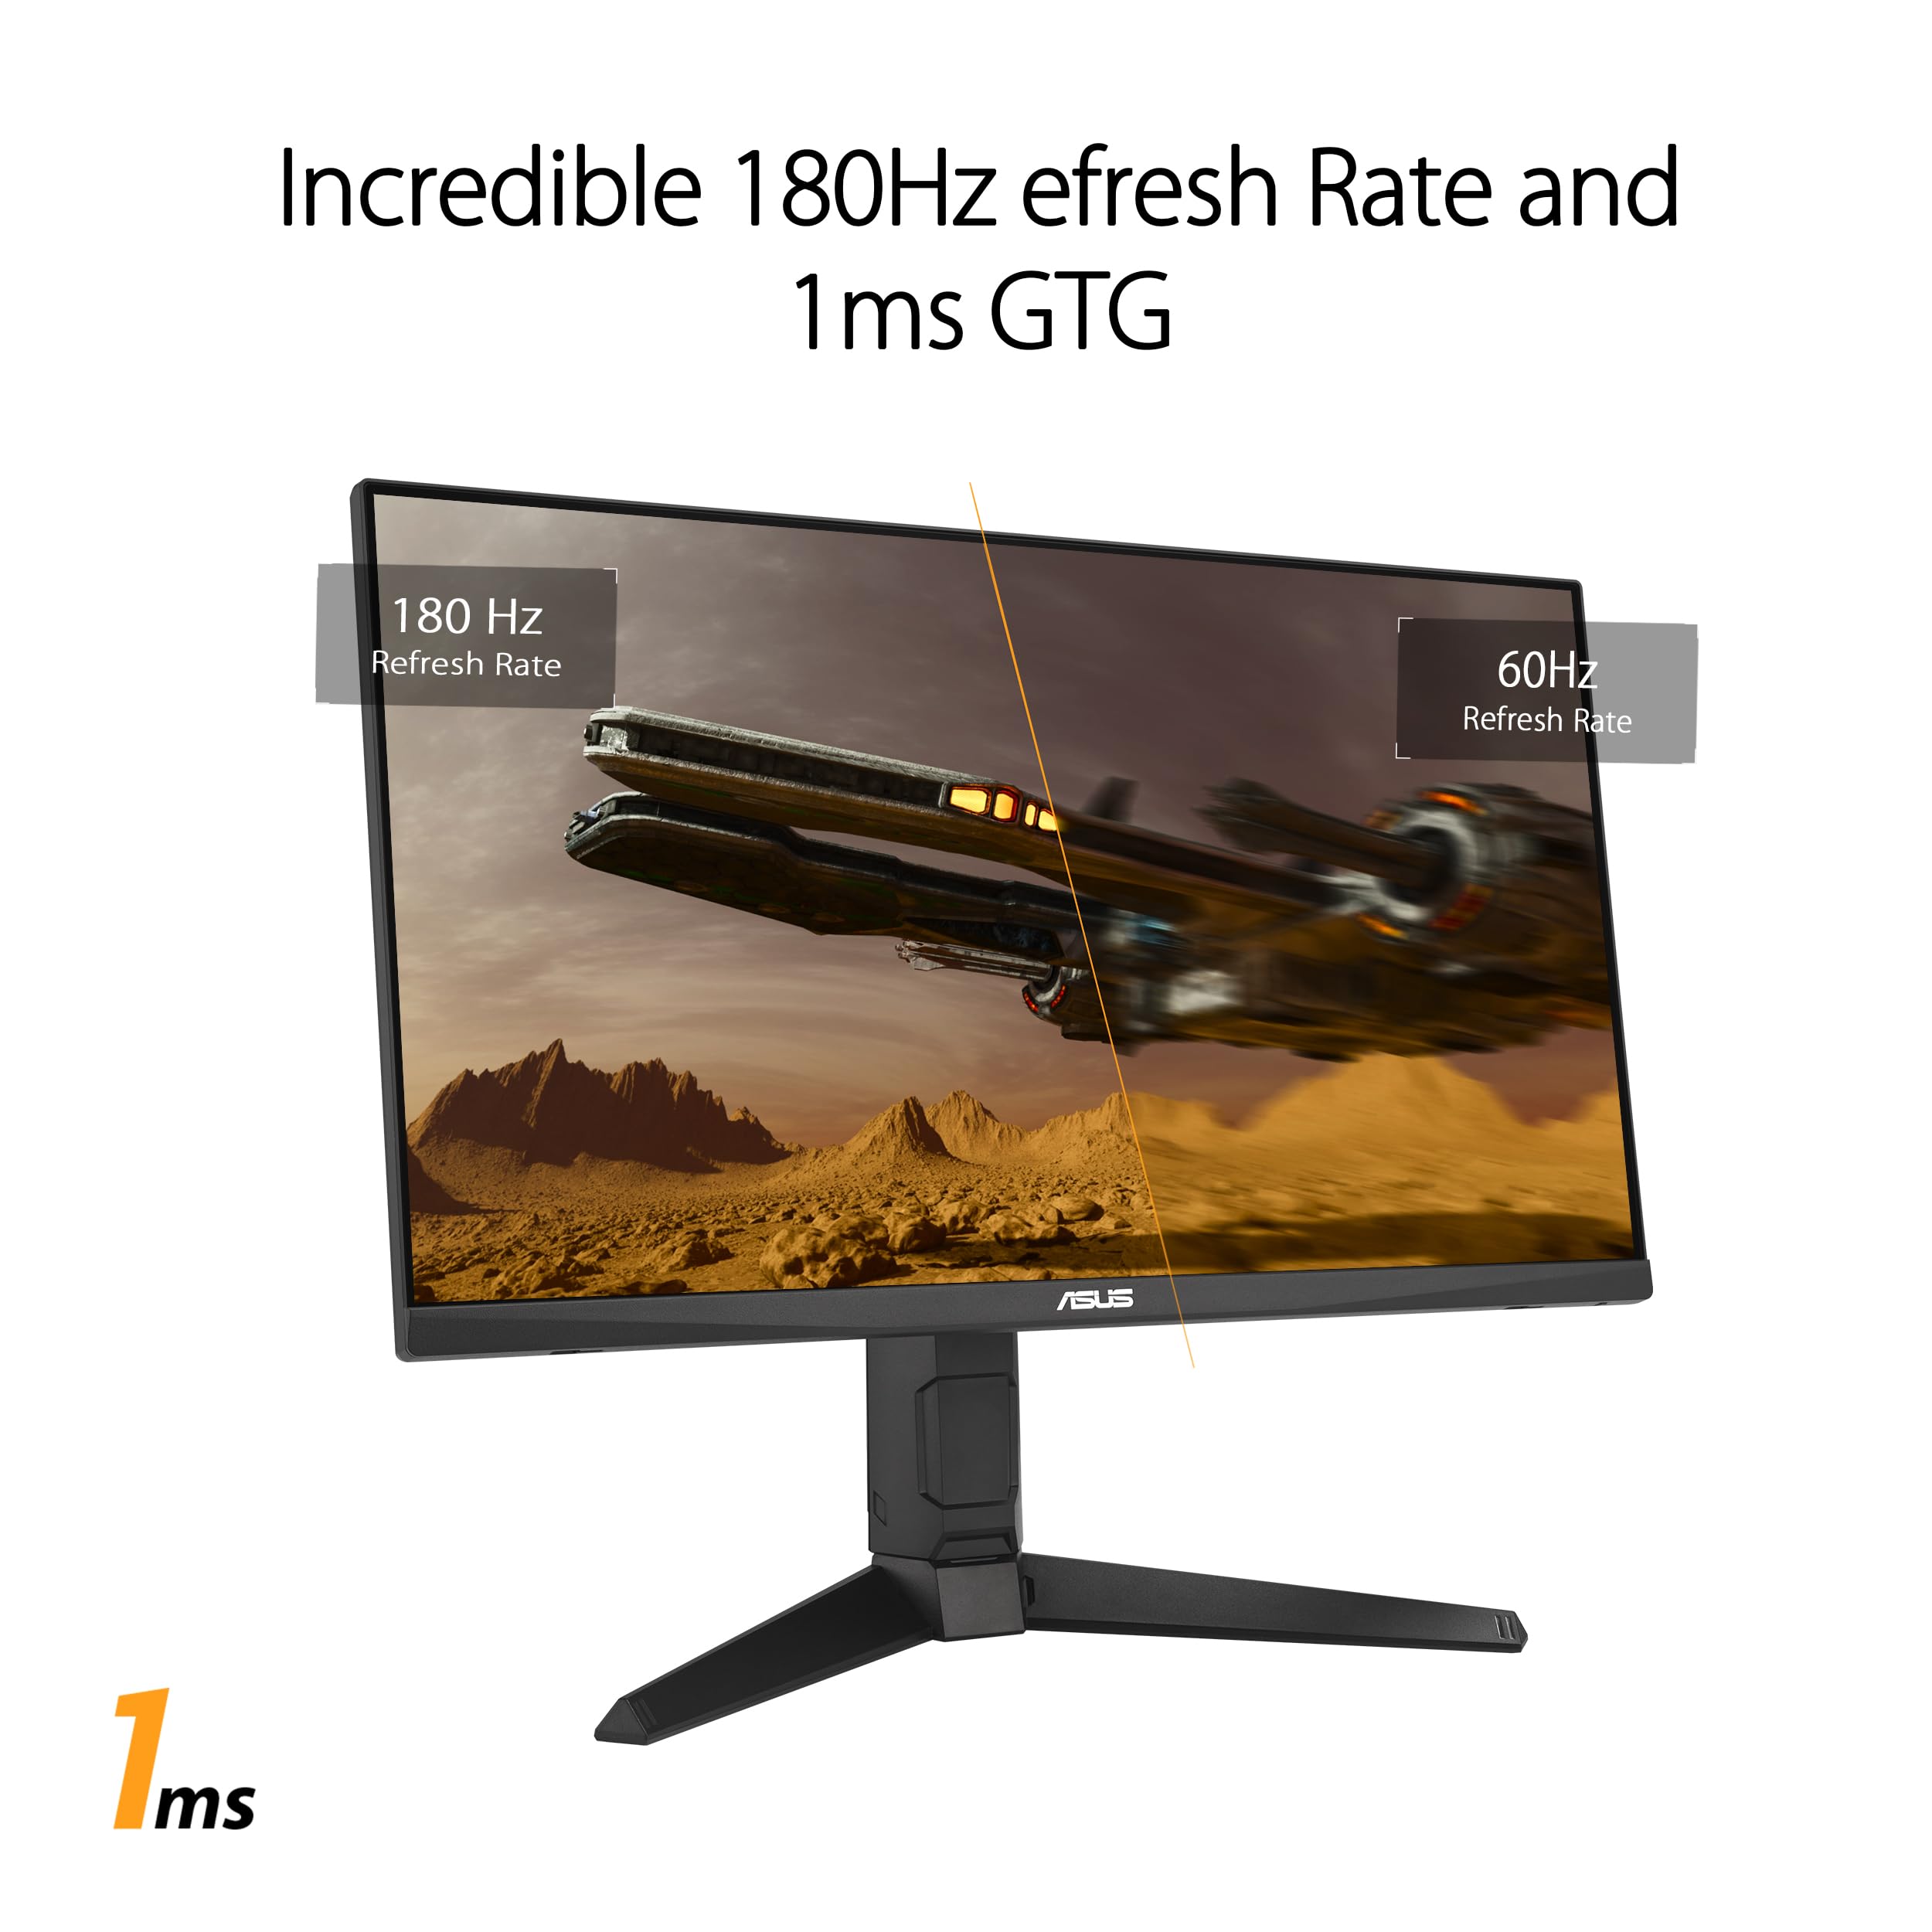 ASUS TUF Gaming 24” (23.8” viewable) 1080P Monitor (VG249QL3A) - Full HD, 180Hz, 1ms, Fast IPS, ELMB, FreeSync Premium, G-SYNC Compatible, Speakers, DisplayPort, Height Adjustable, 3 Year Warranty